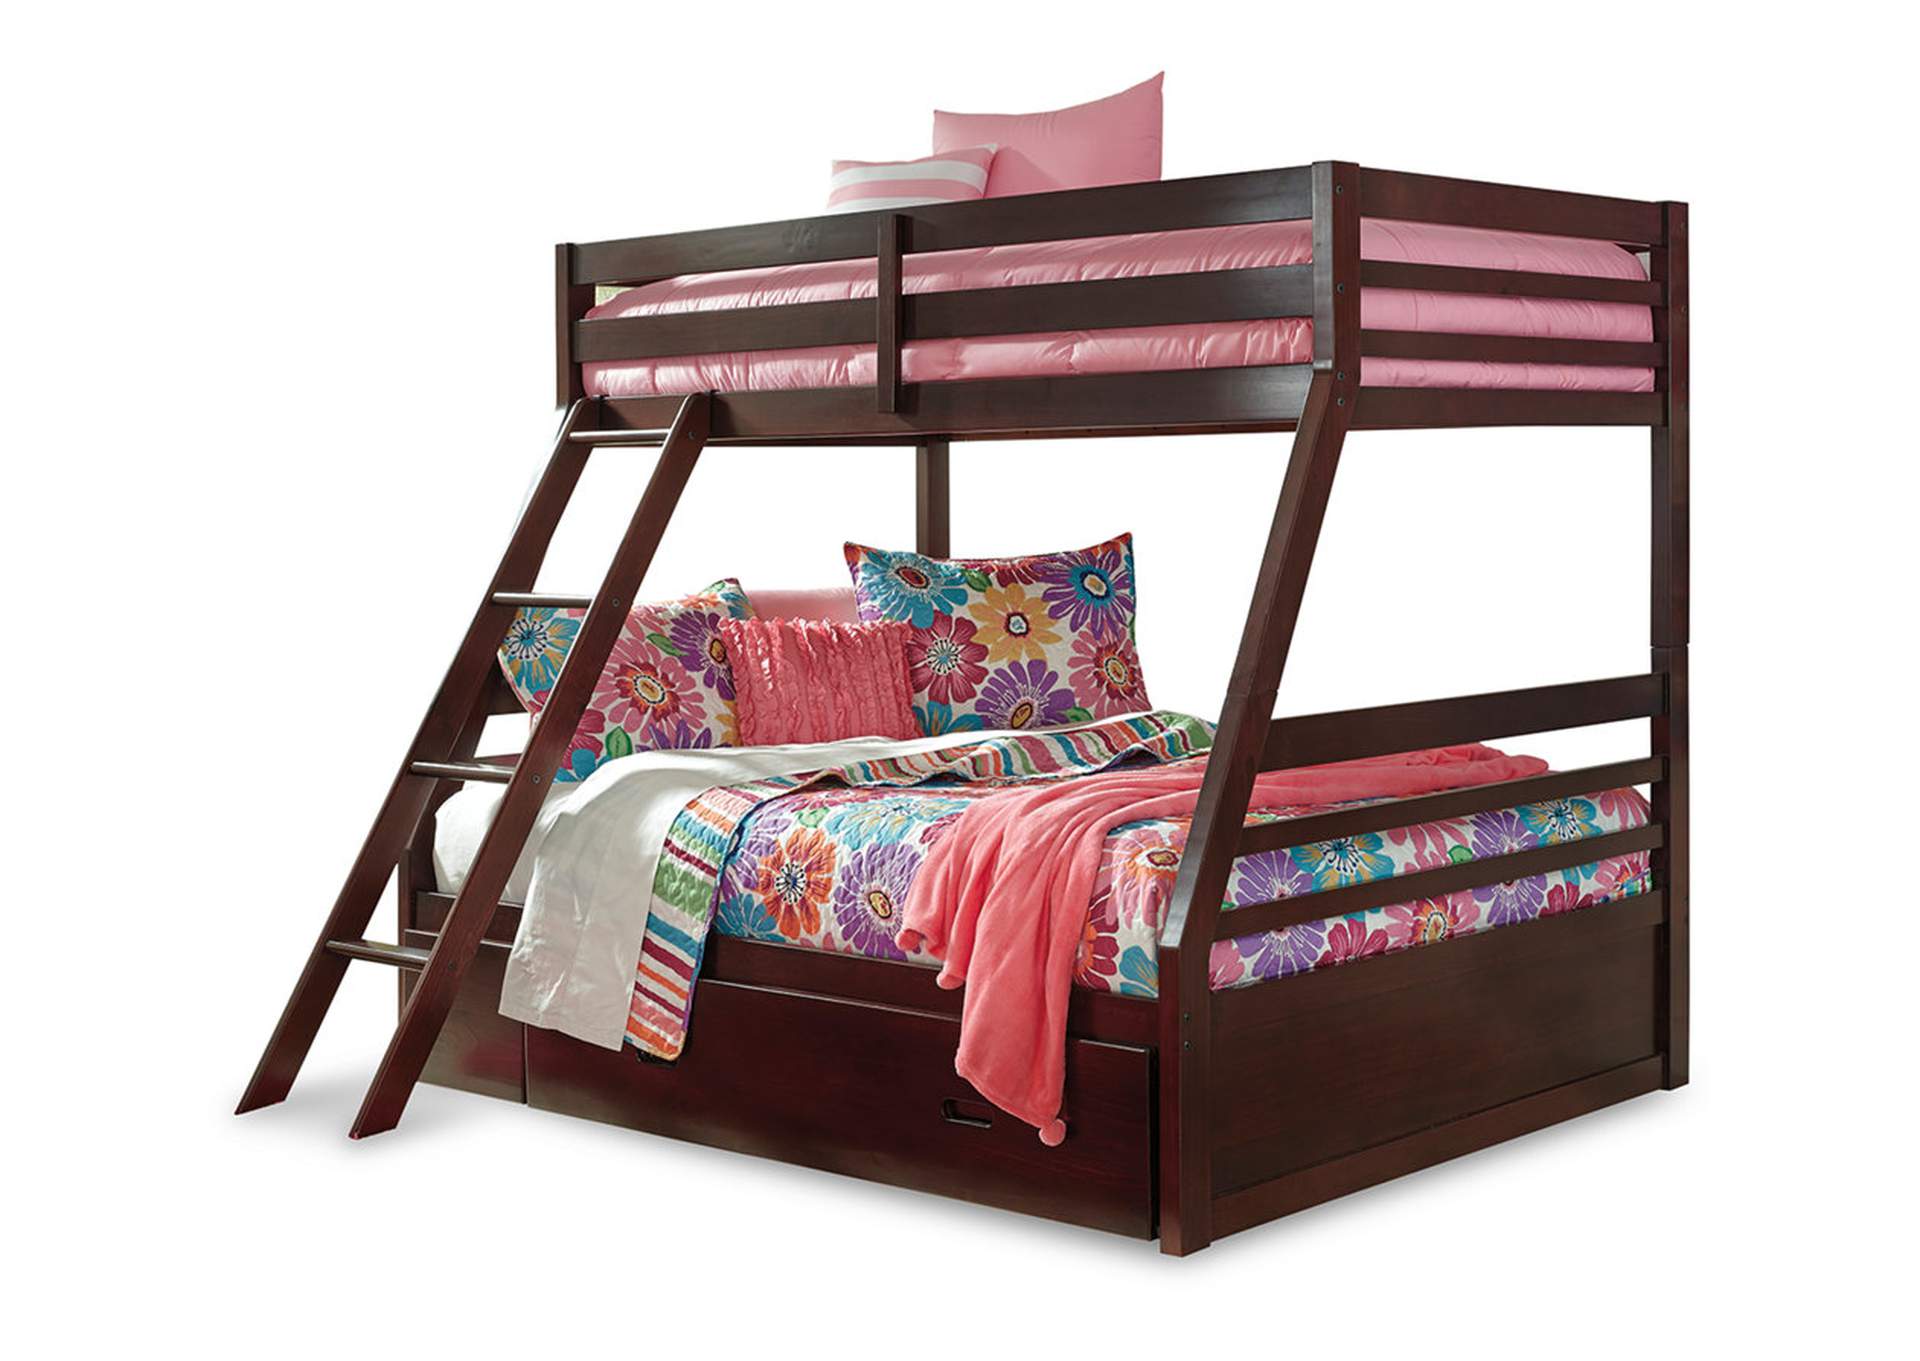 Halanton Twin Over Full Bunk Bed With 1, Metal Twin Over Full Bunk Bed With Trundle And Storage Drawers